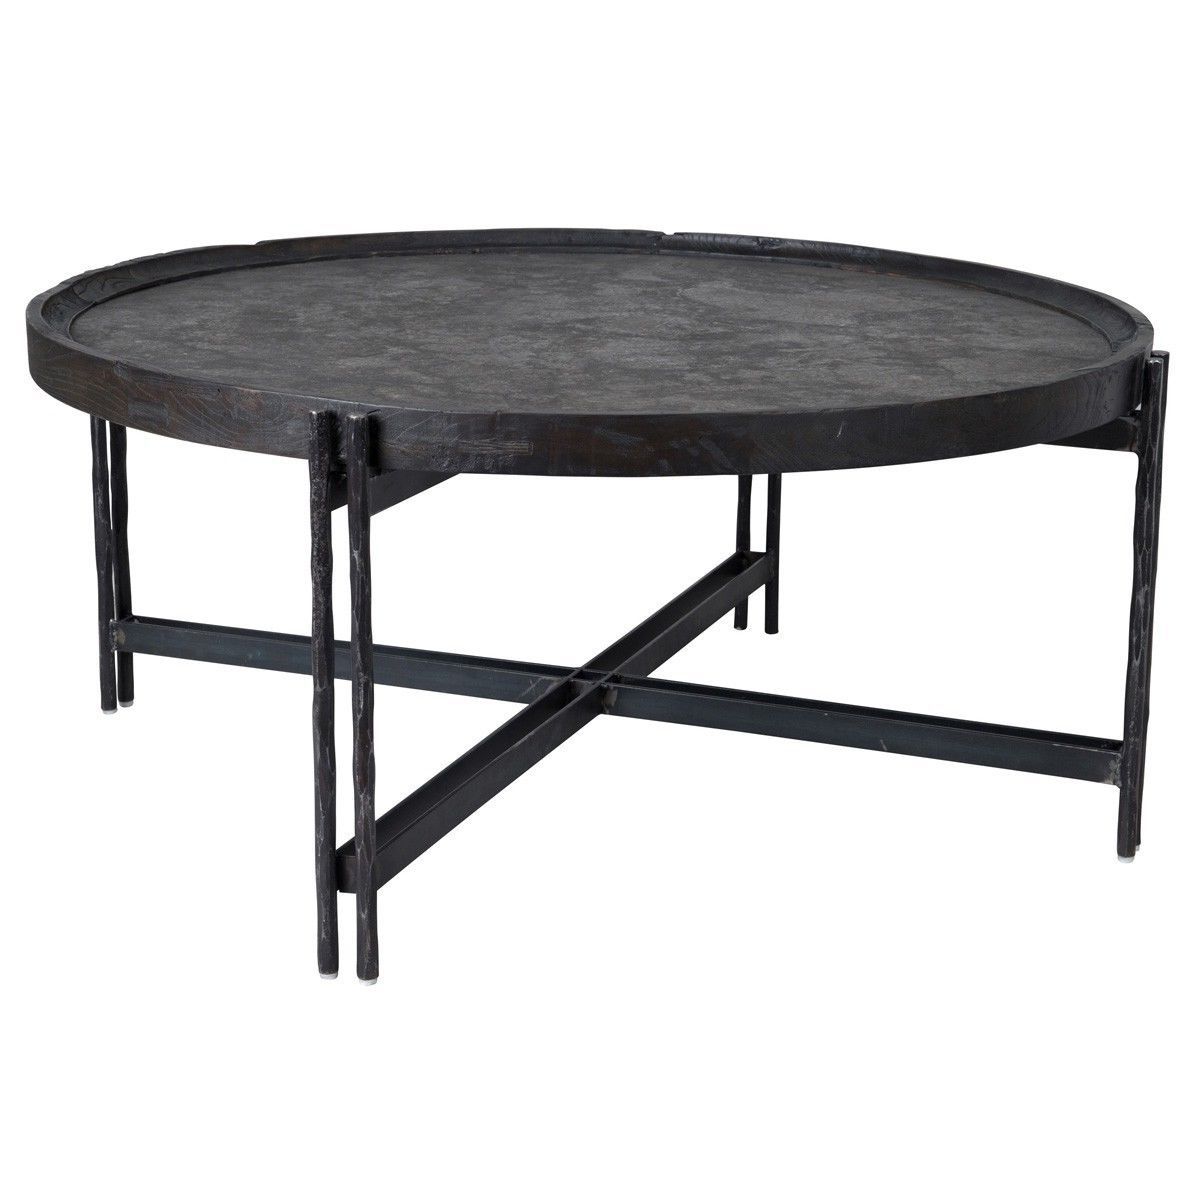 Popular 40" Diameter Coffee Table Solid Reclaimed Elm Cast Iron Blue Stone Regarding Reclaimed Elm Cast Iron Coffee Tables (View 2 of 20)